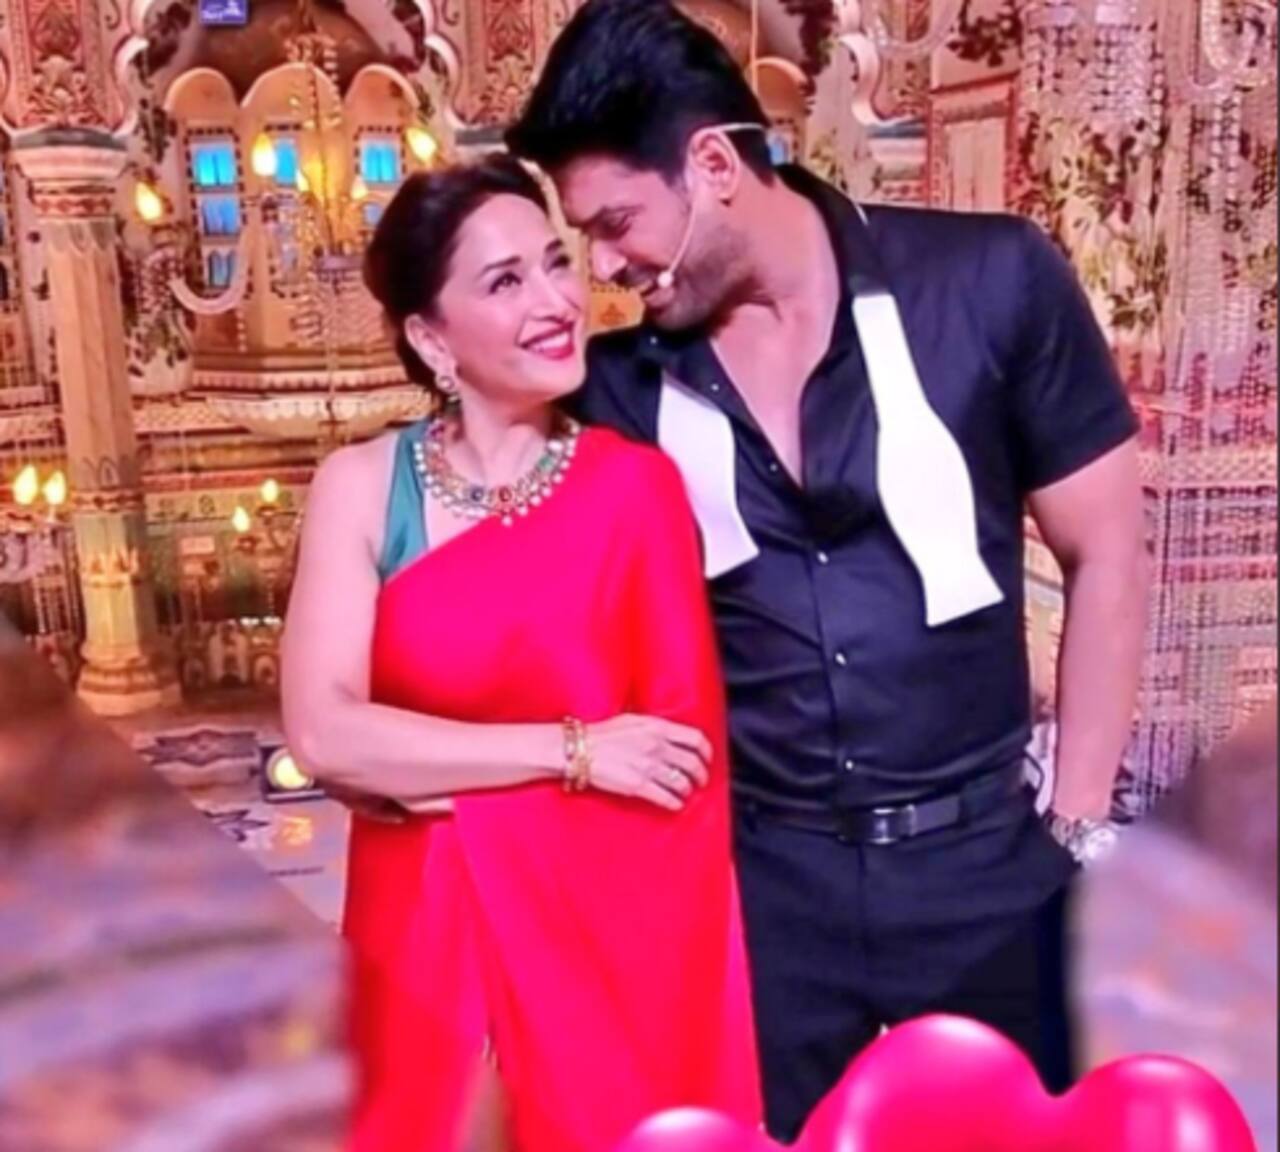 Trending OTT News Today: Amul celebrates The Family Man 2, Sidharth Shukla romances Madhuri Dixit on Broken But Beautiful 3 promotions on Dance Deewane 3 and more